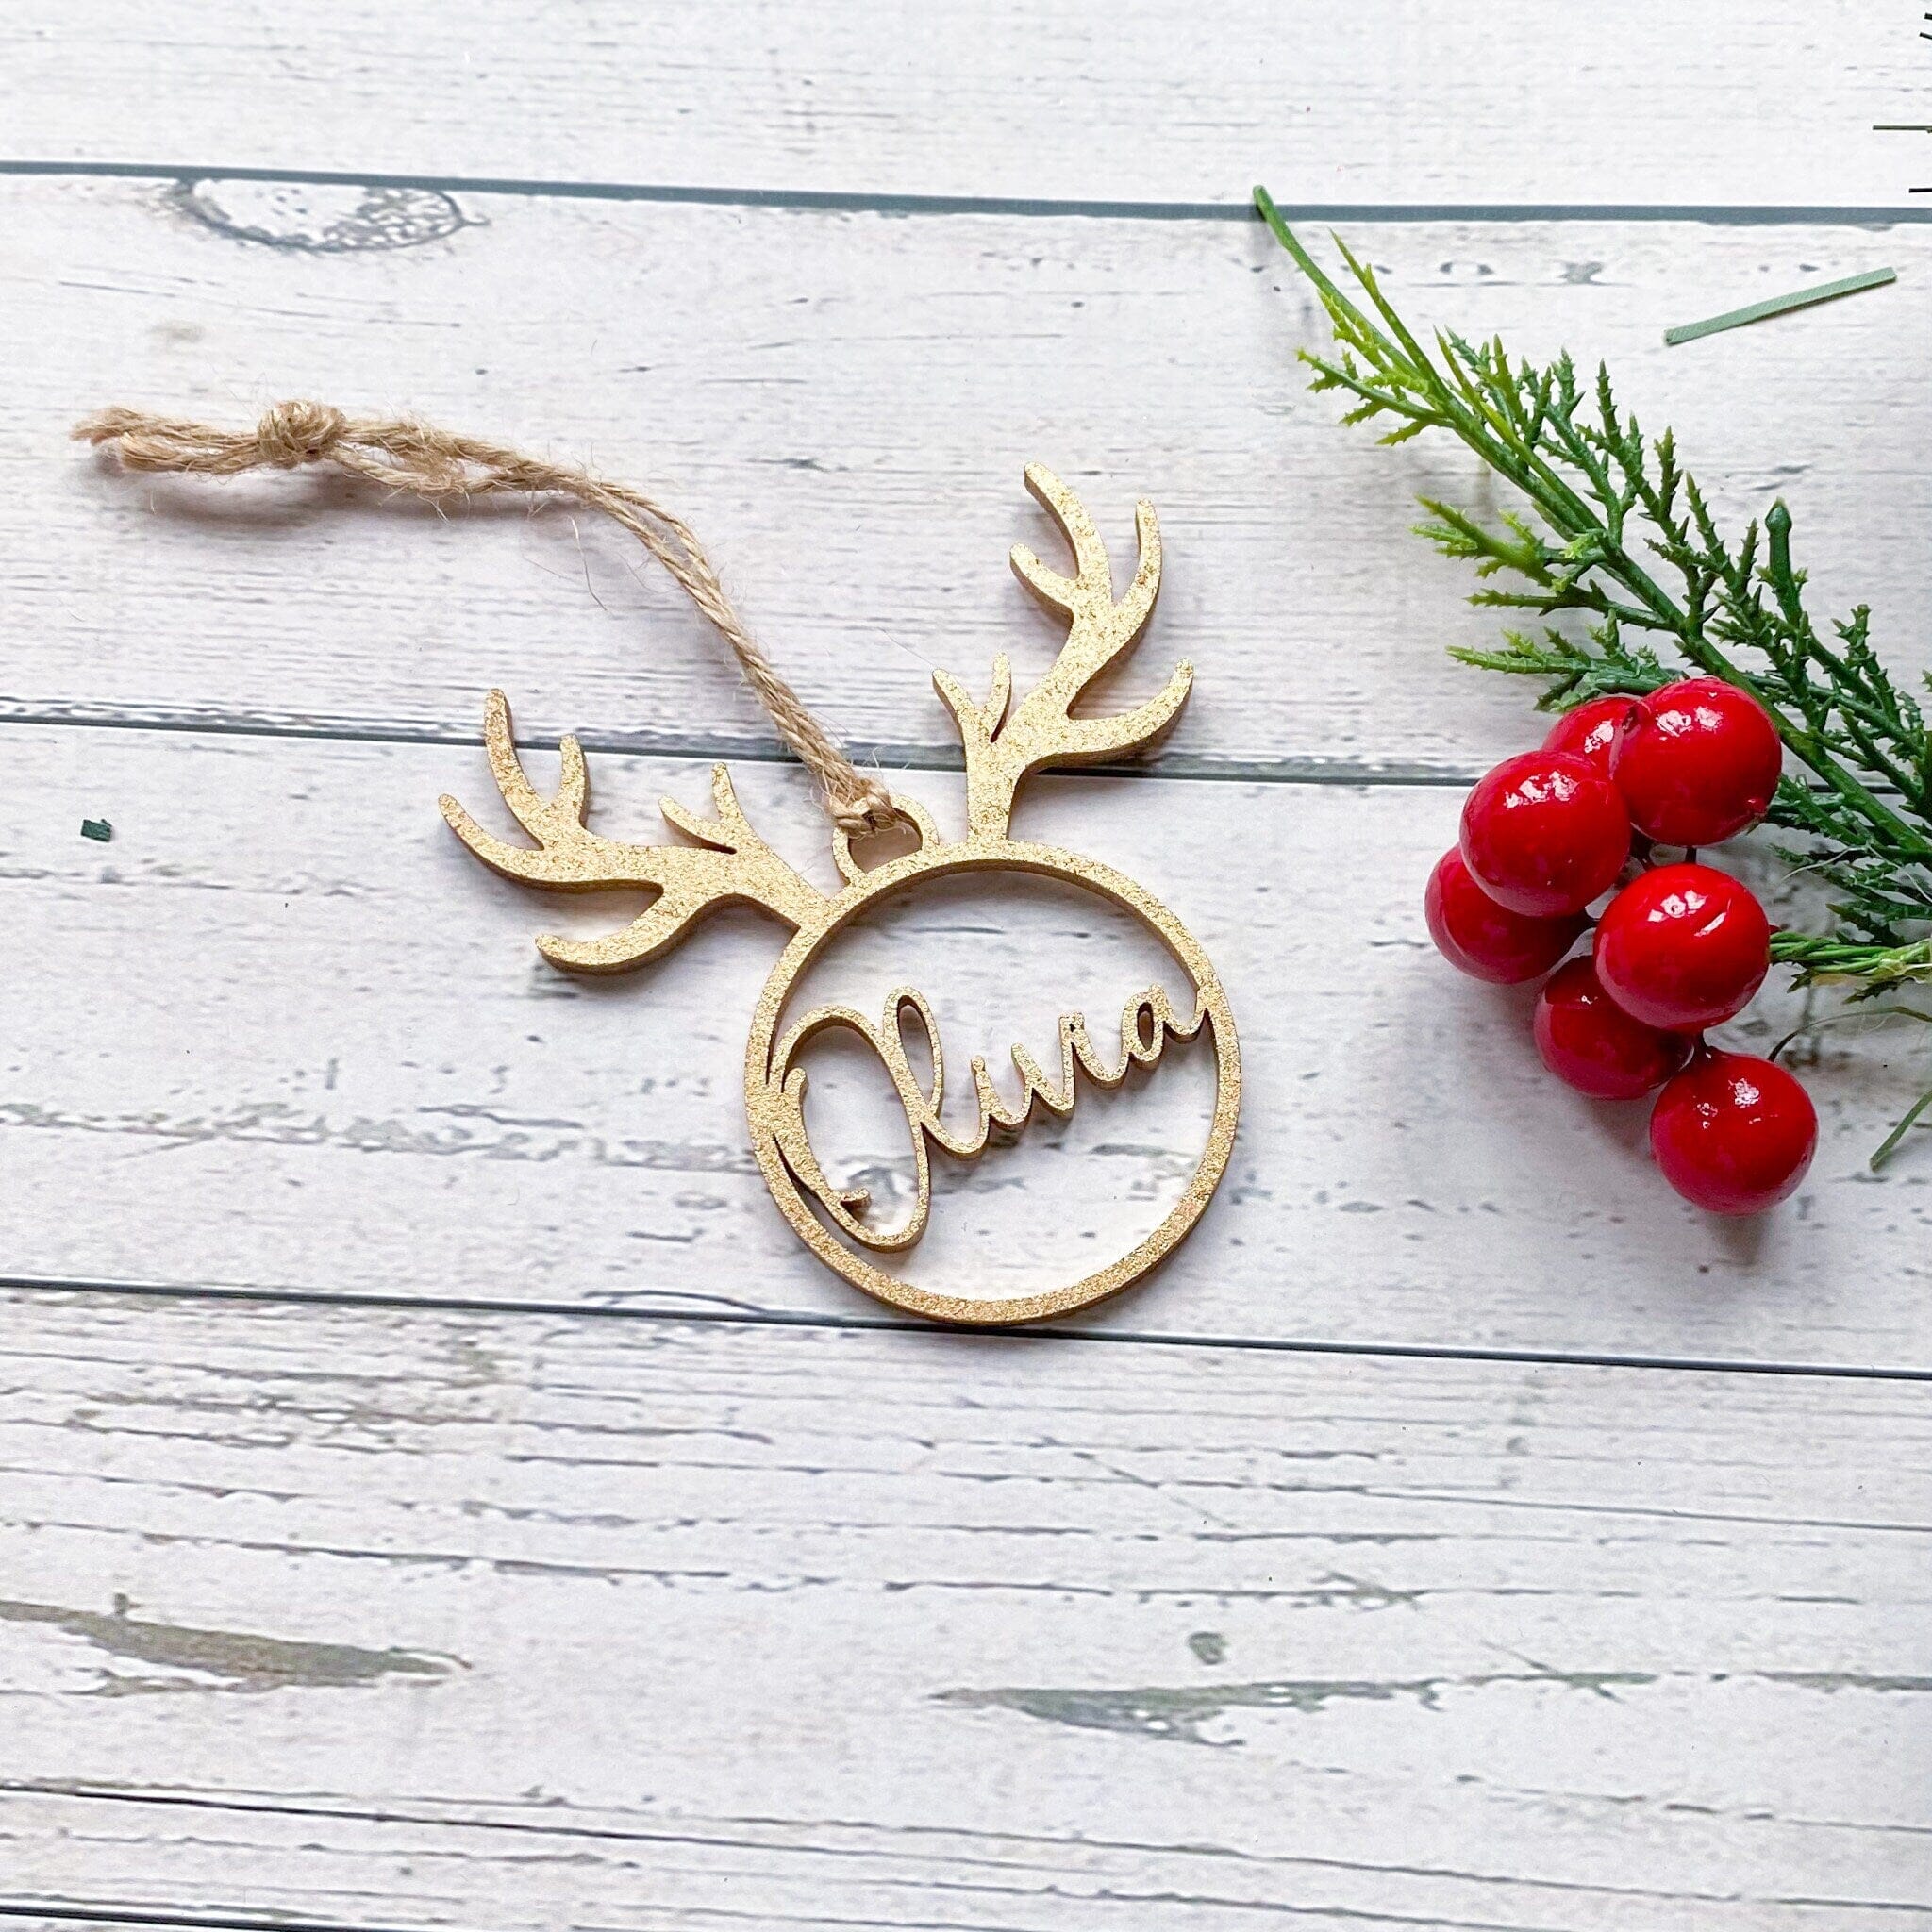 Personalised Wooden Christmas Ornament With Name Reindeer Christmas Decor Gold Silver Rose Gold Black Natural Colour